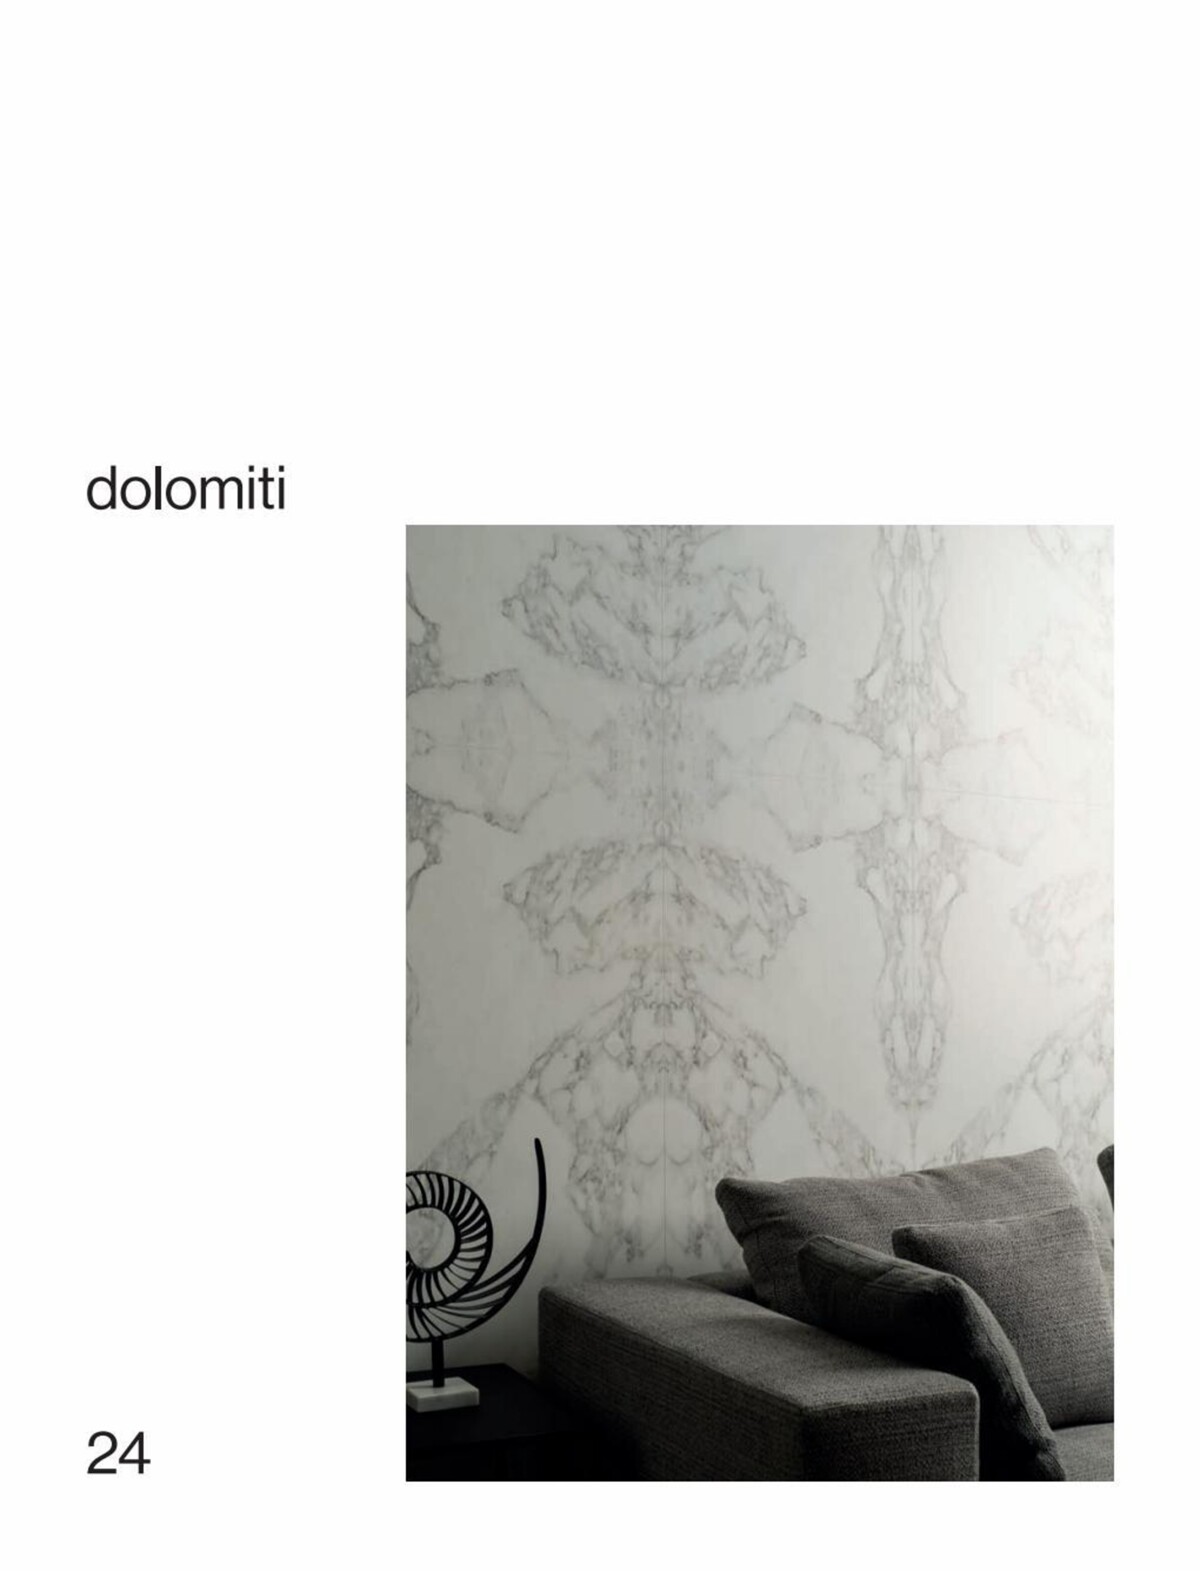 Catalogue MARMI,a ceramic tile that echoes the purity of marble, page 00024